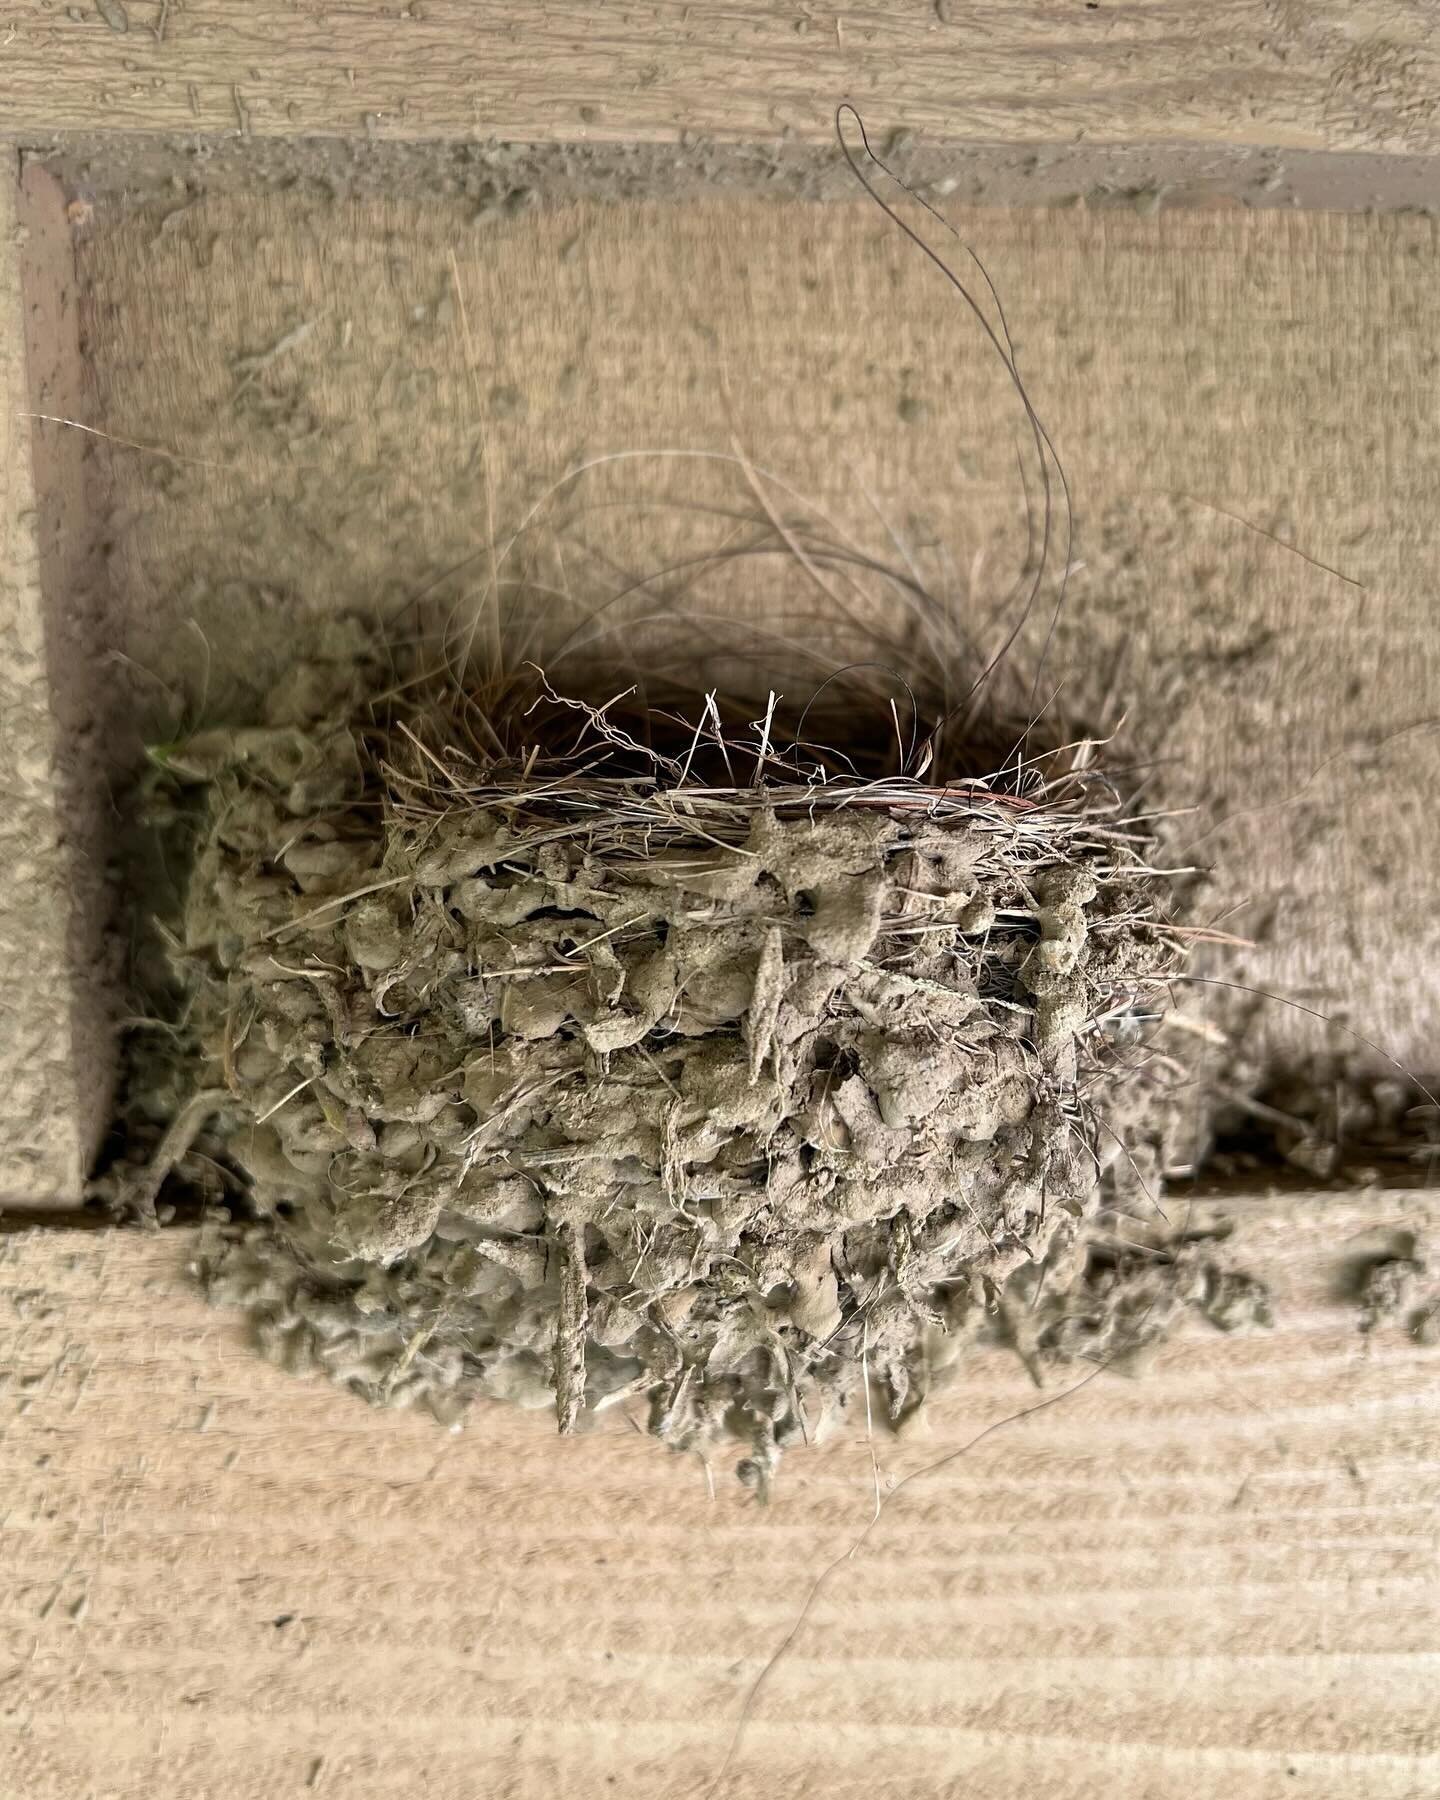 For this wildlife Wednesday, we&rsquo;ll continue to follow our Black Phoebe (a type of flycatcher) pair as they build their nest and raise their brood this spring. Compared to last week, they have now pretty much finished the mud nest including the 